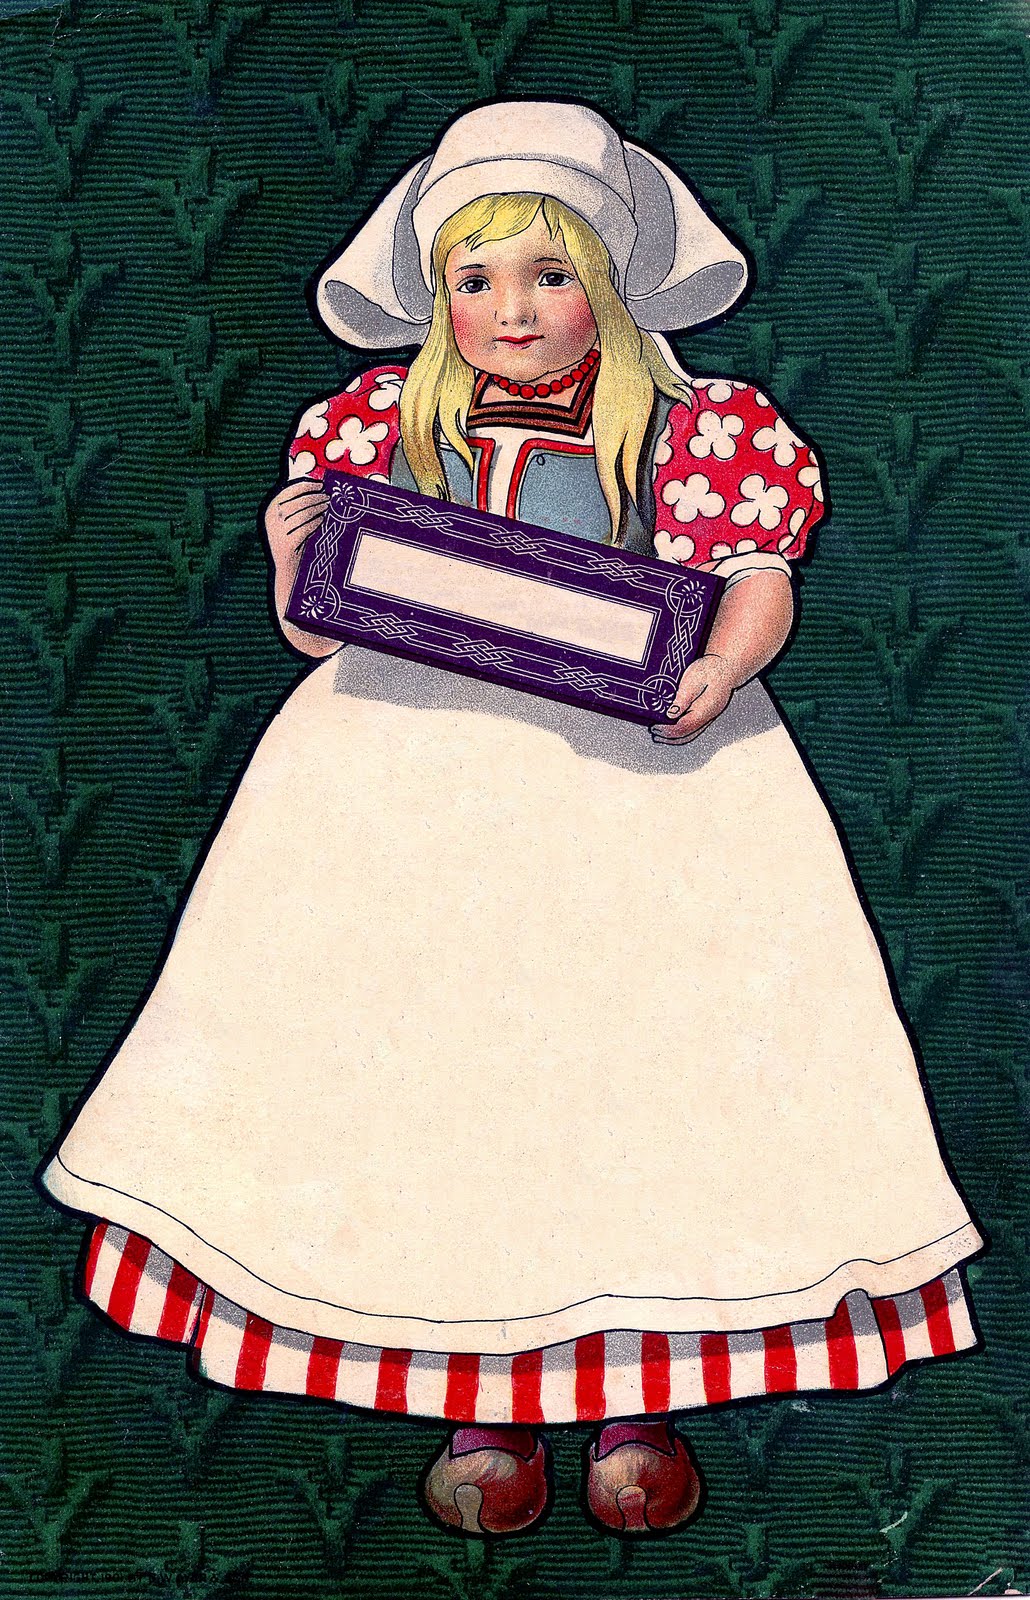 Vintage Advertising Clip Art   Darling Dutch Girl   The Graphics Fairy